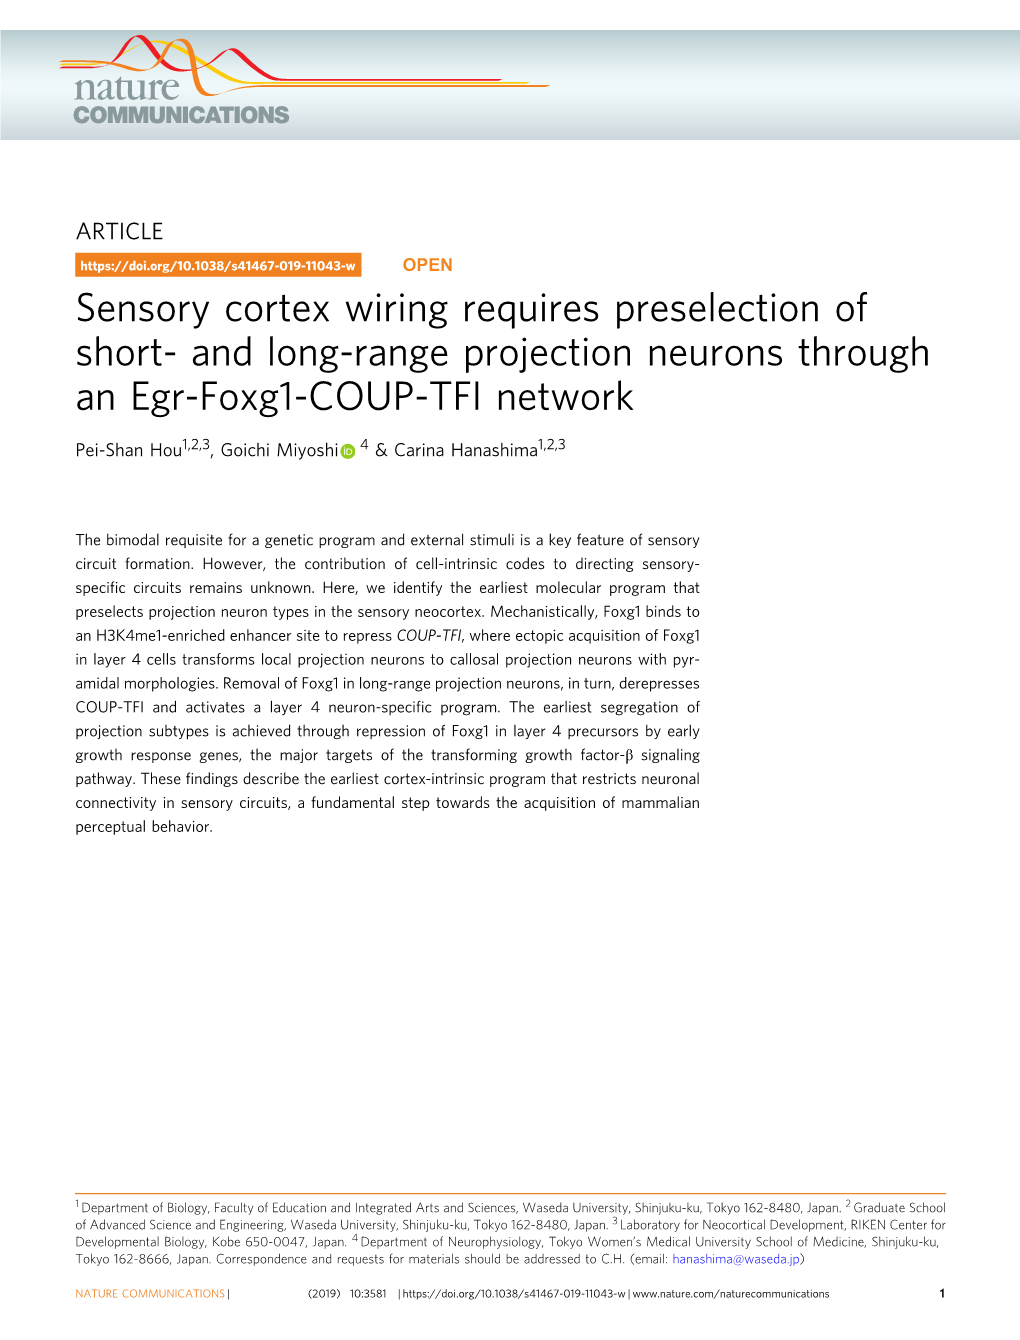 Sensory Cortex Wiring Requires Preselection of Short- and Long-Range Projection Neurons Through an Egr-Foxg1-COUP-TFI Network